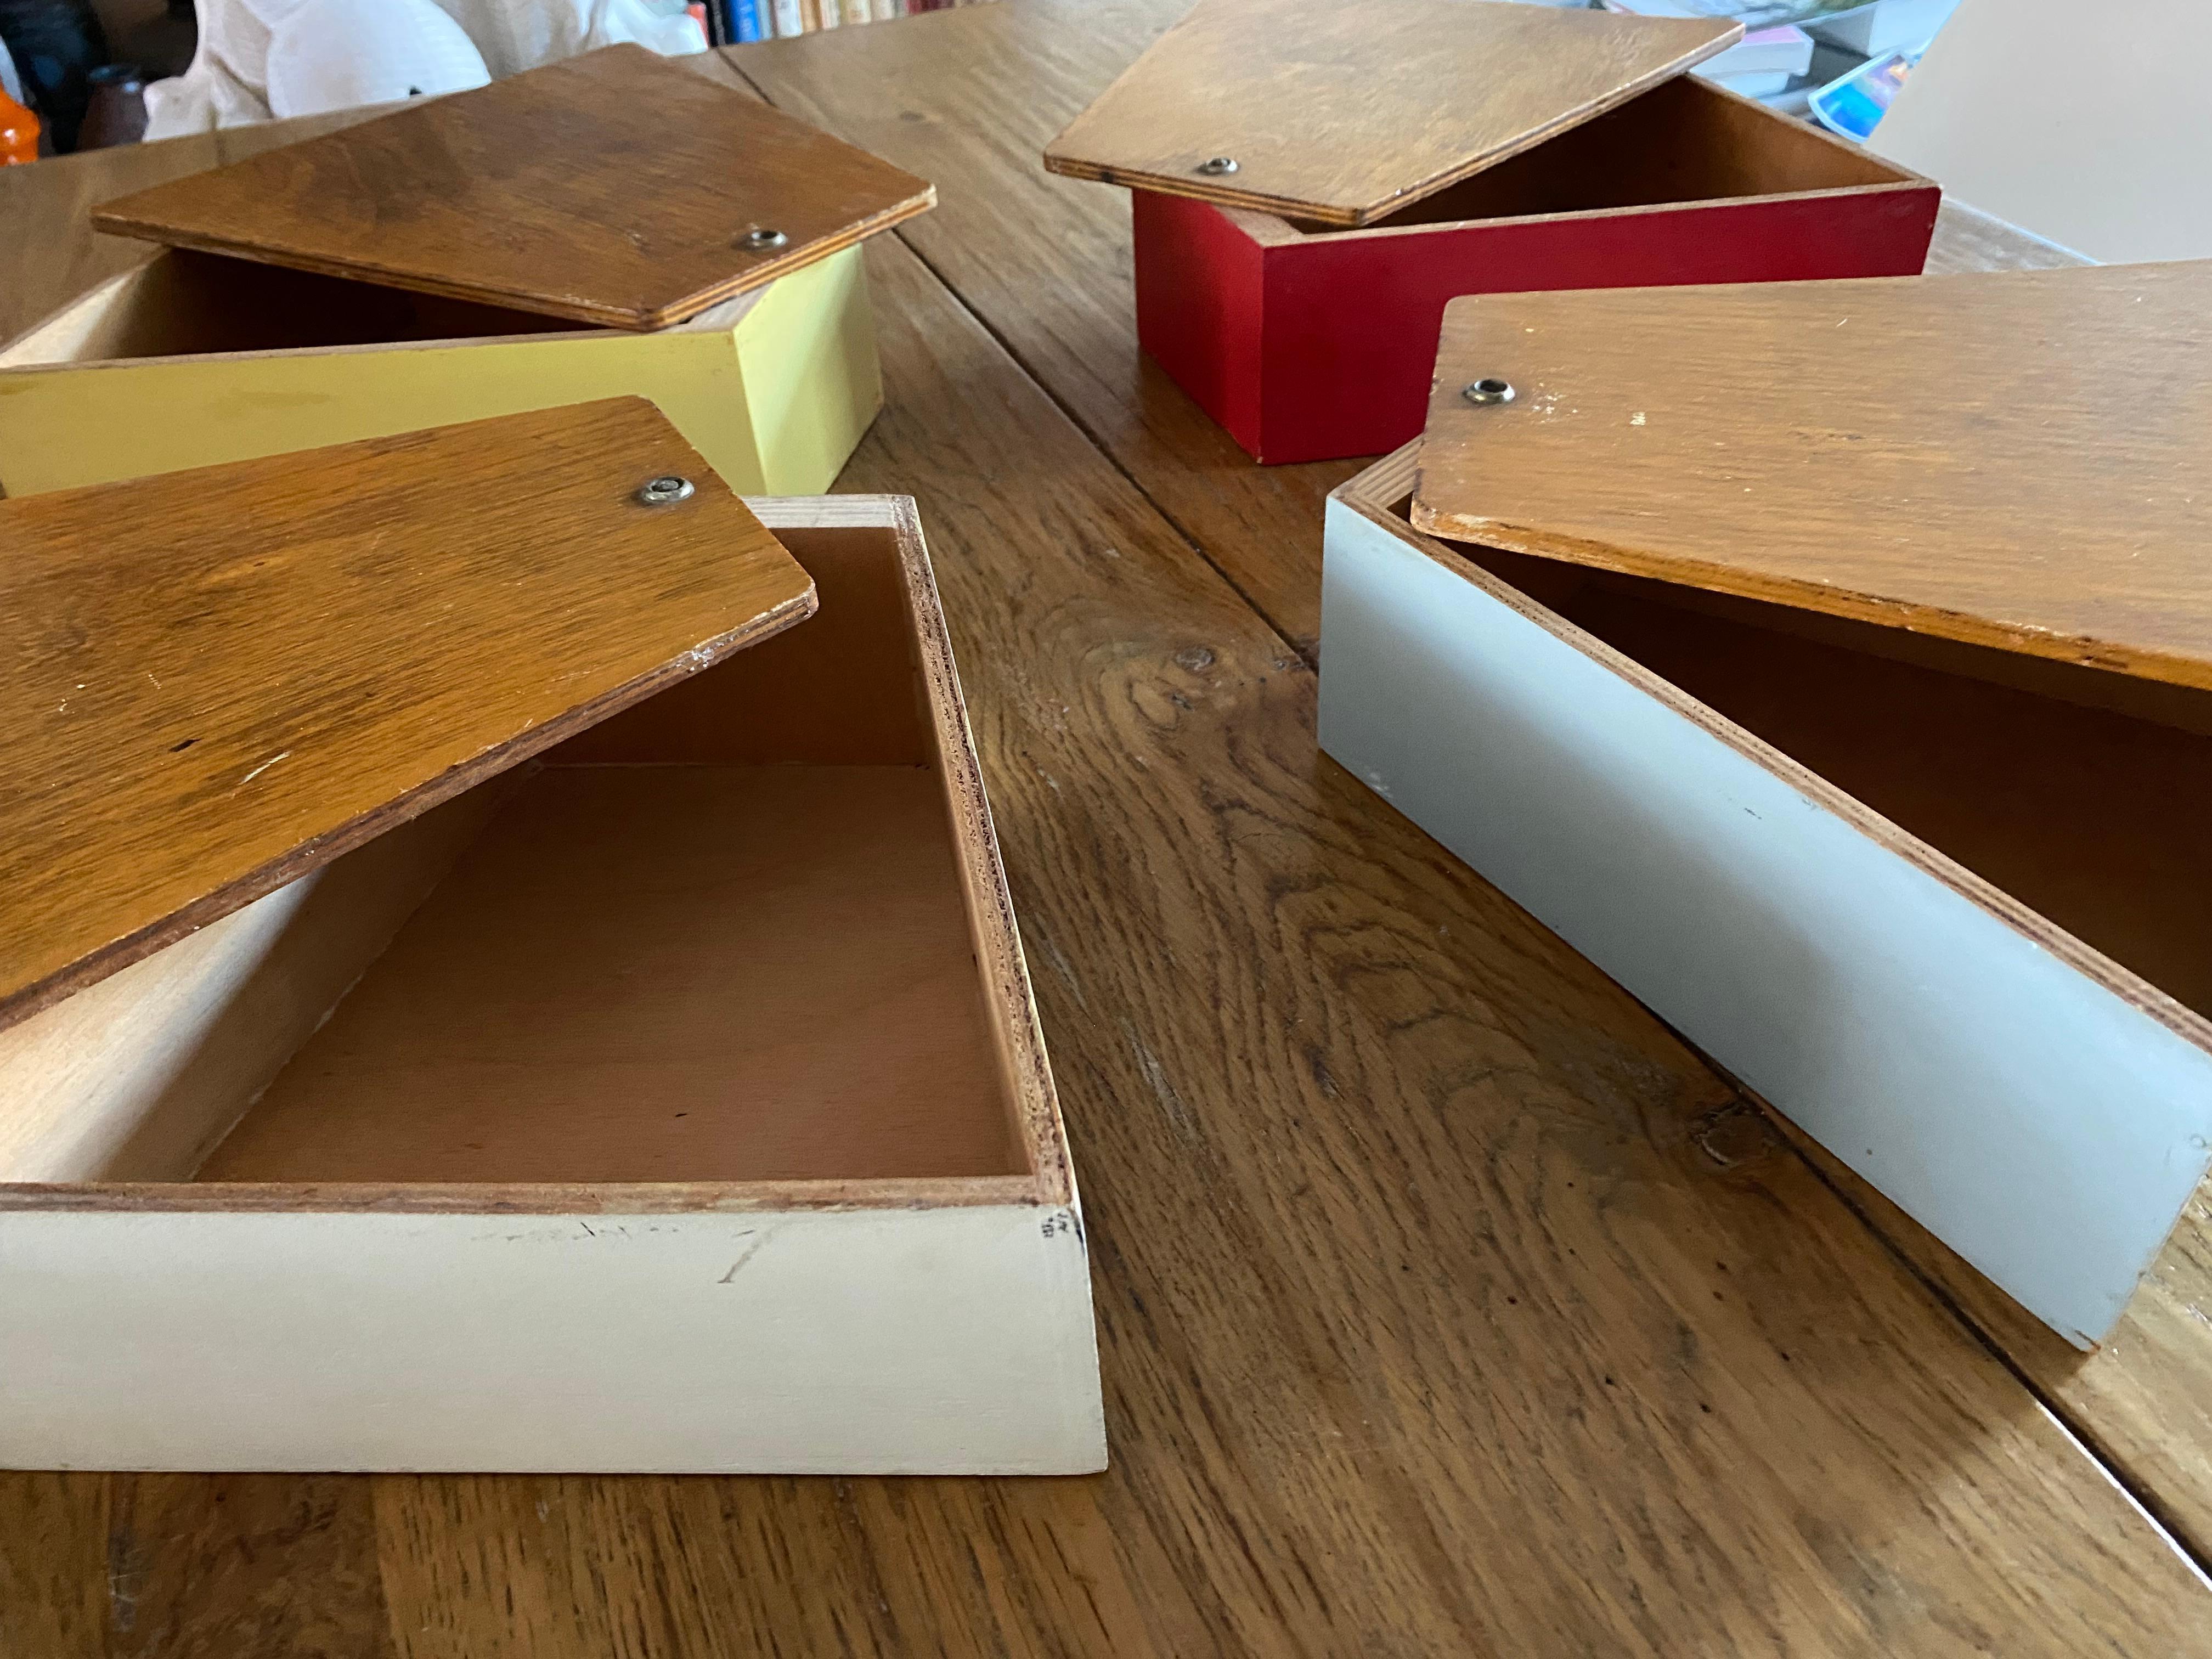 Stylish and decorative sewing box / storage box designed by Joost Teders for Metalux Netherlands in 1955. The original lacquered wooden boxes colored in soft pastels are very nice in contrast to the birch plywood tops. These tops swivel to open. The